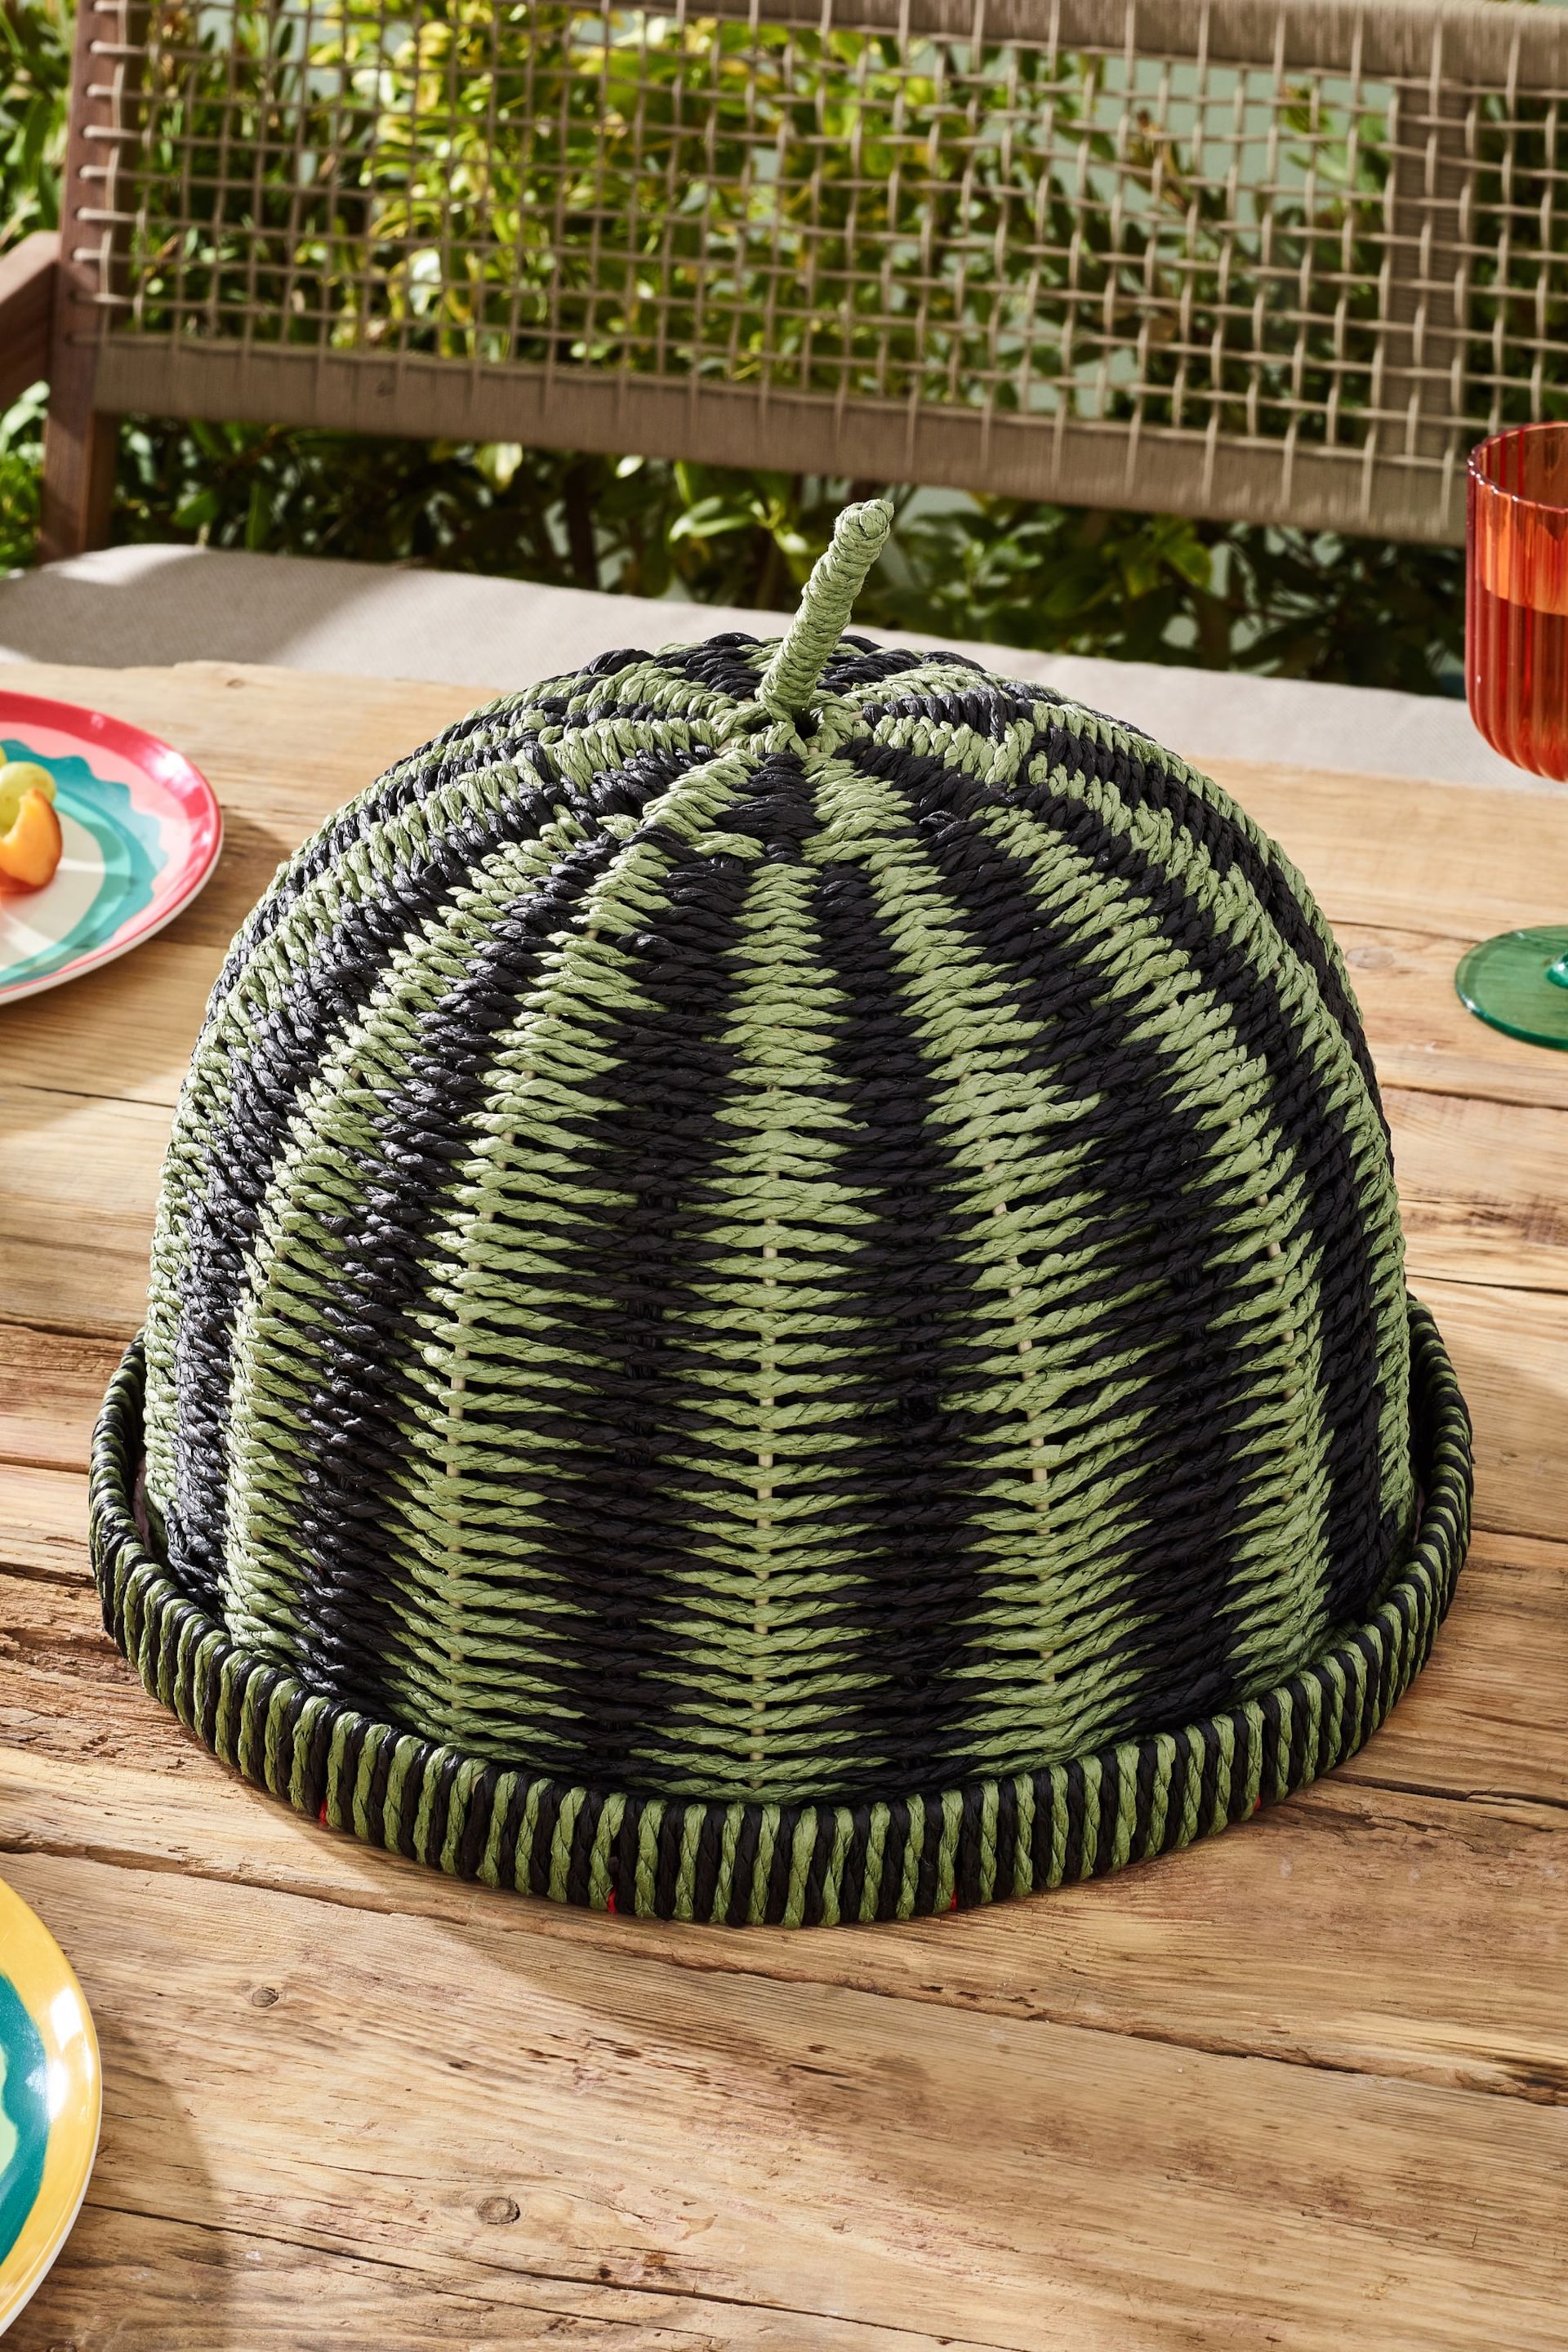 Green Woven Watermelon Food Cover - Image 3 of 5